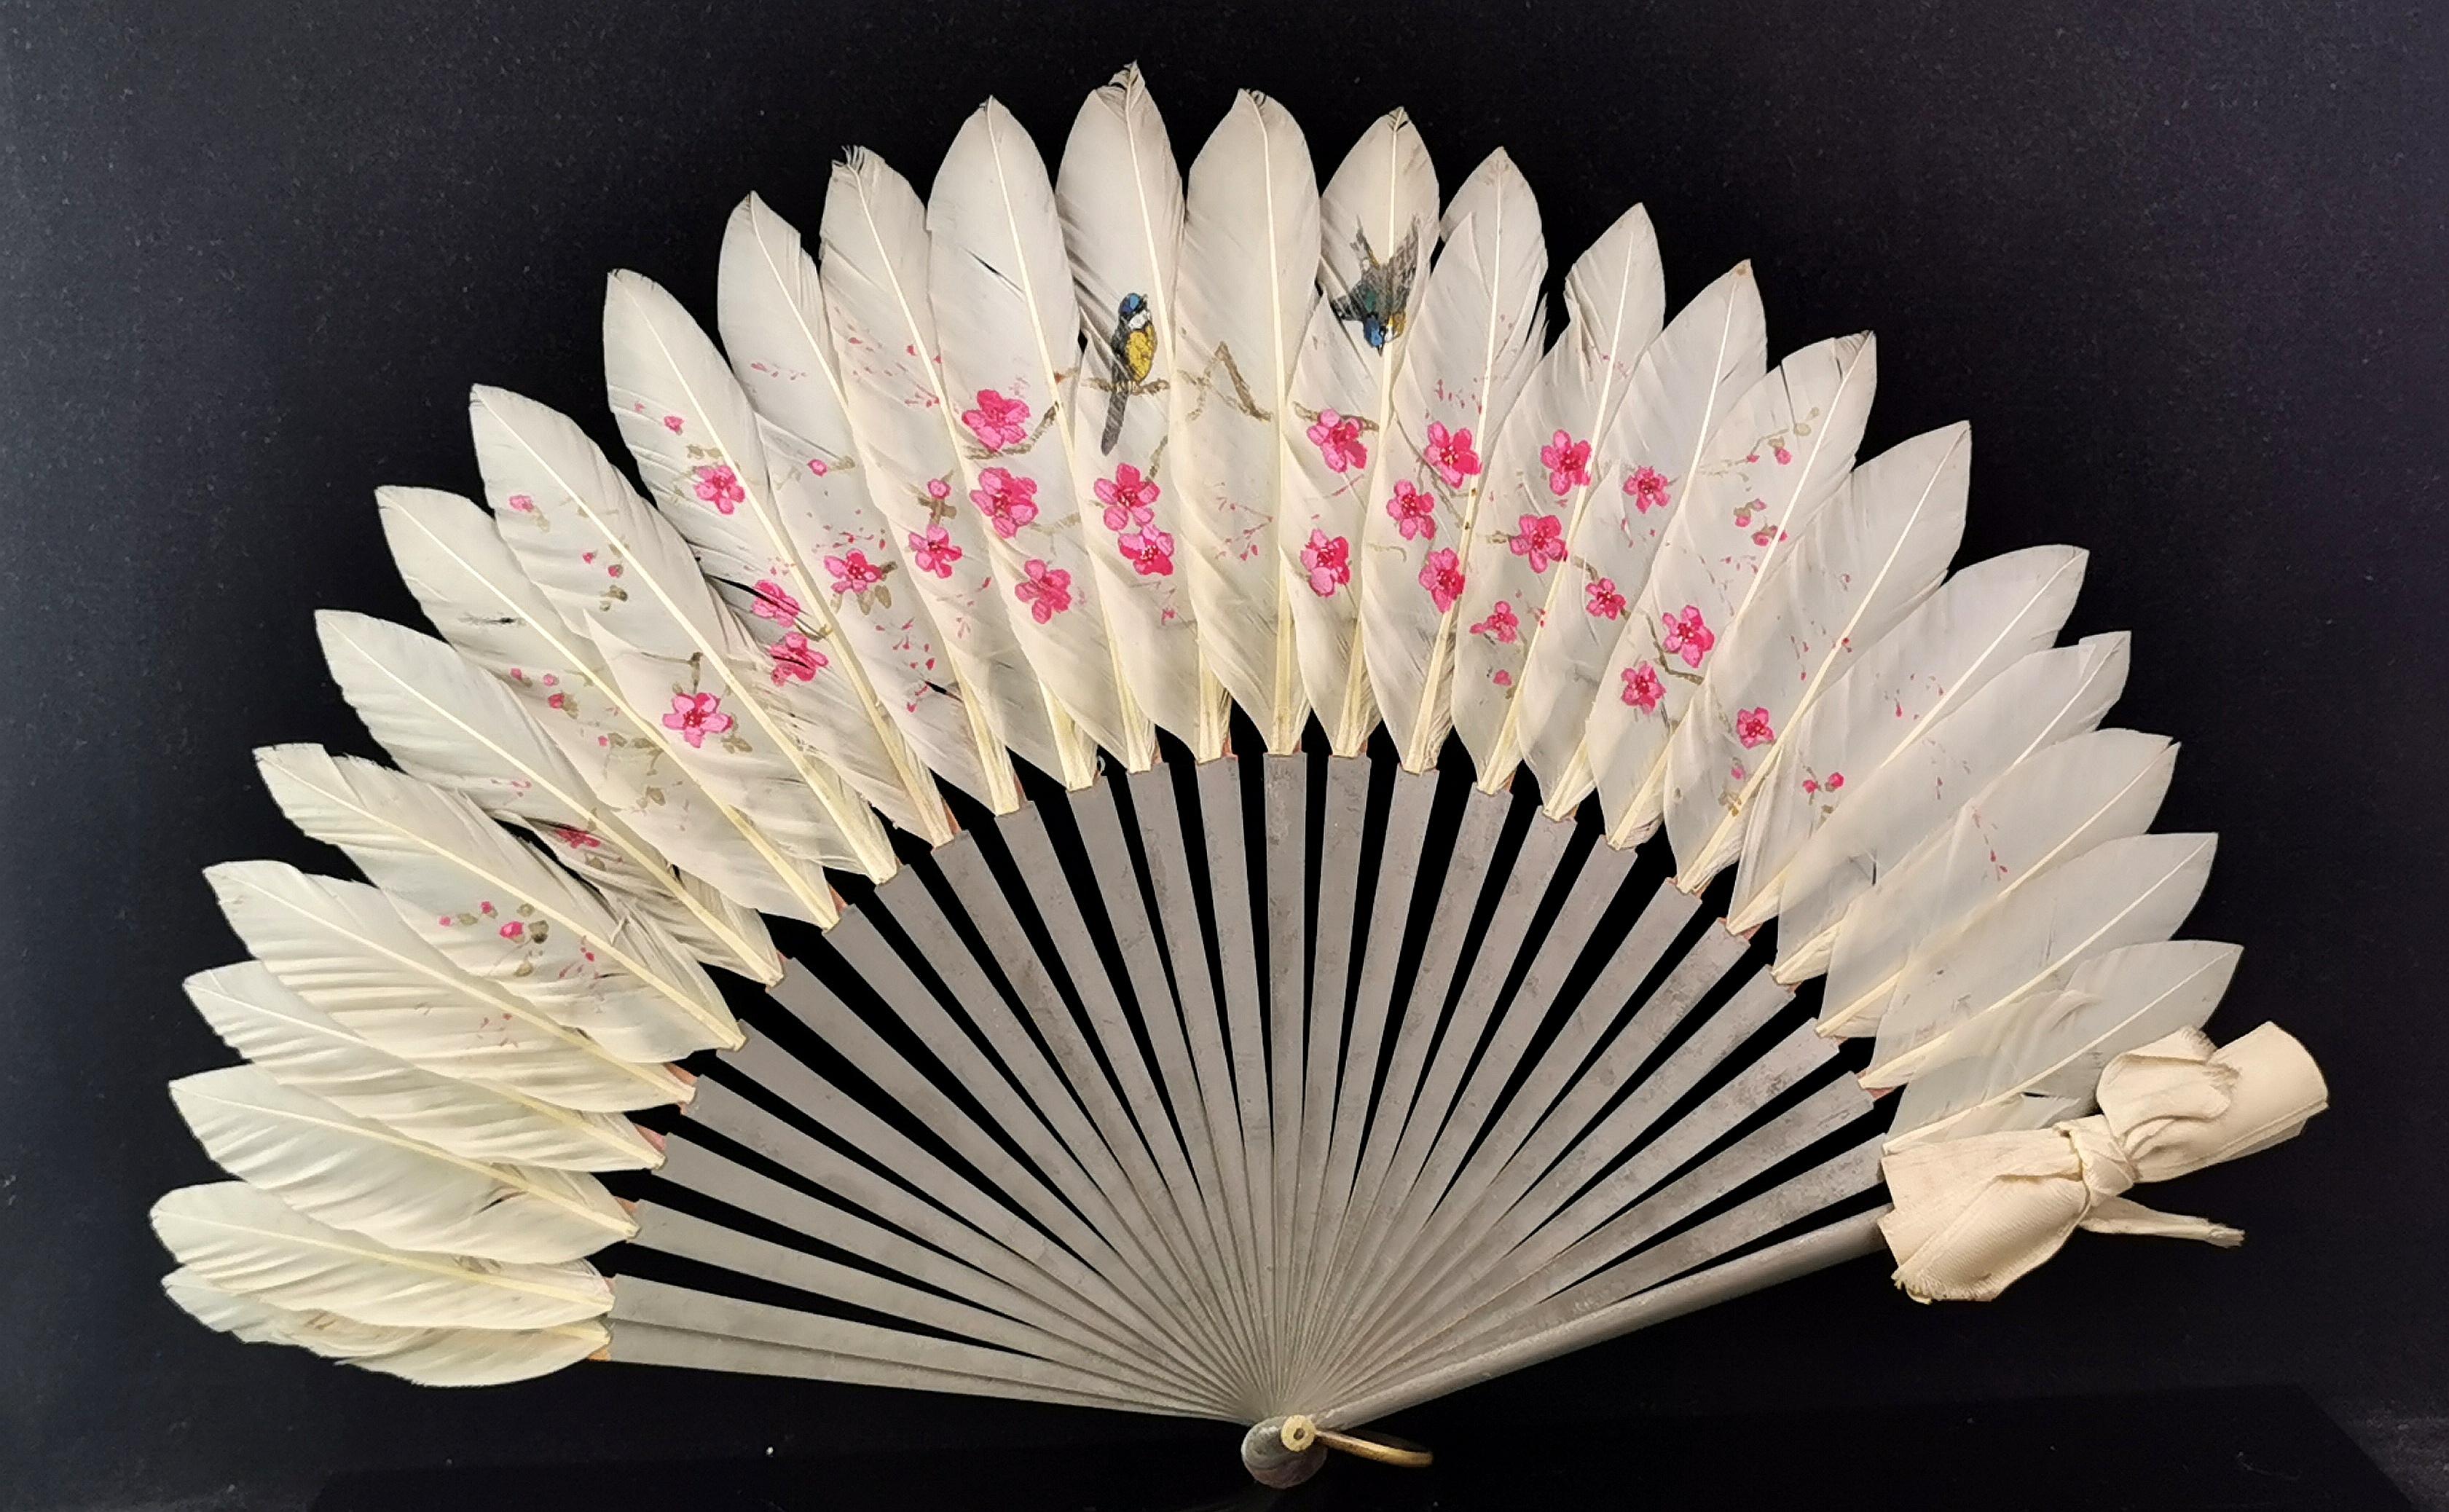 A beautiful antique Chinese feather hand fan.

The fan is made from off white feathers possibly goose, attached to silver painted wood sticks and guards.

The feathers have a gorgeous hand painted scene of birds and cherry blossom.

It has a small